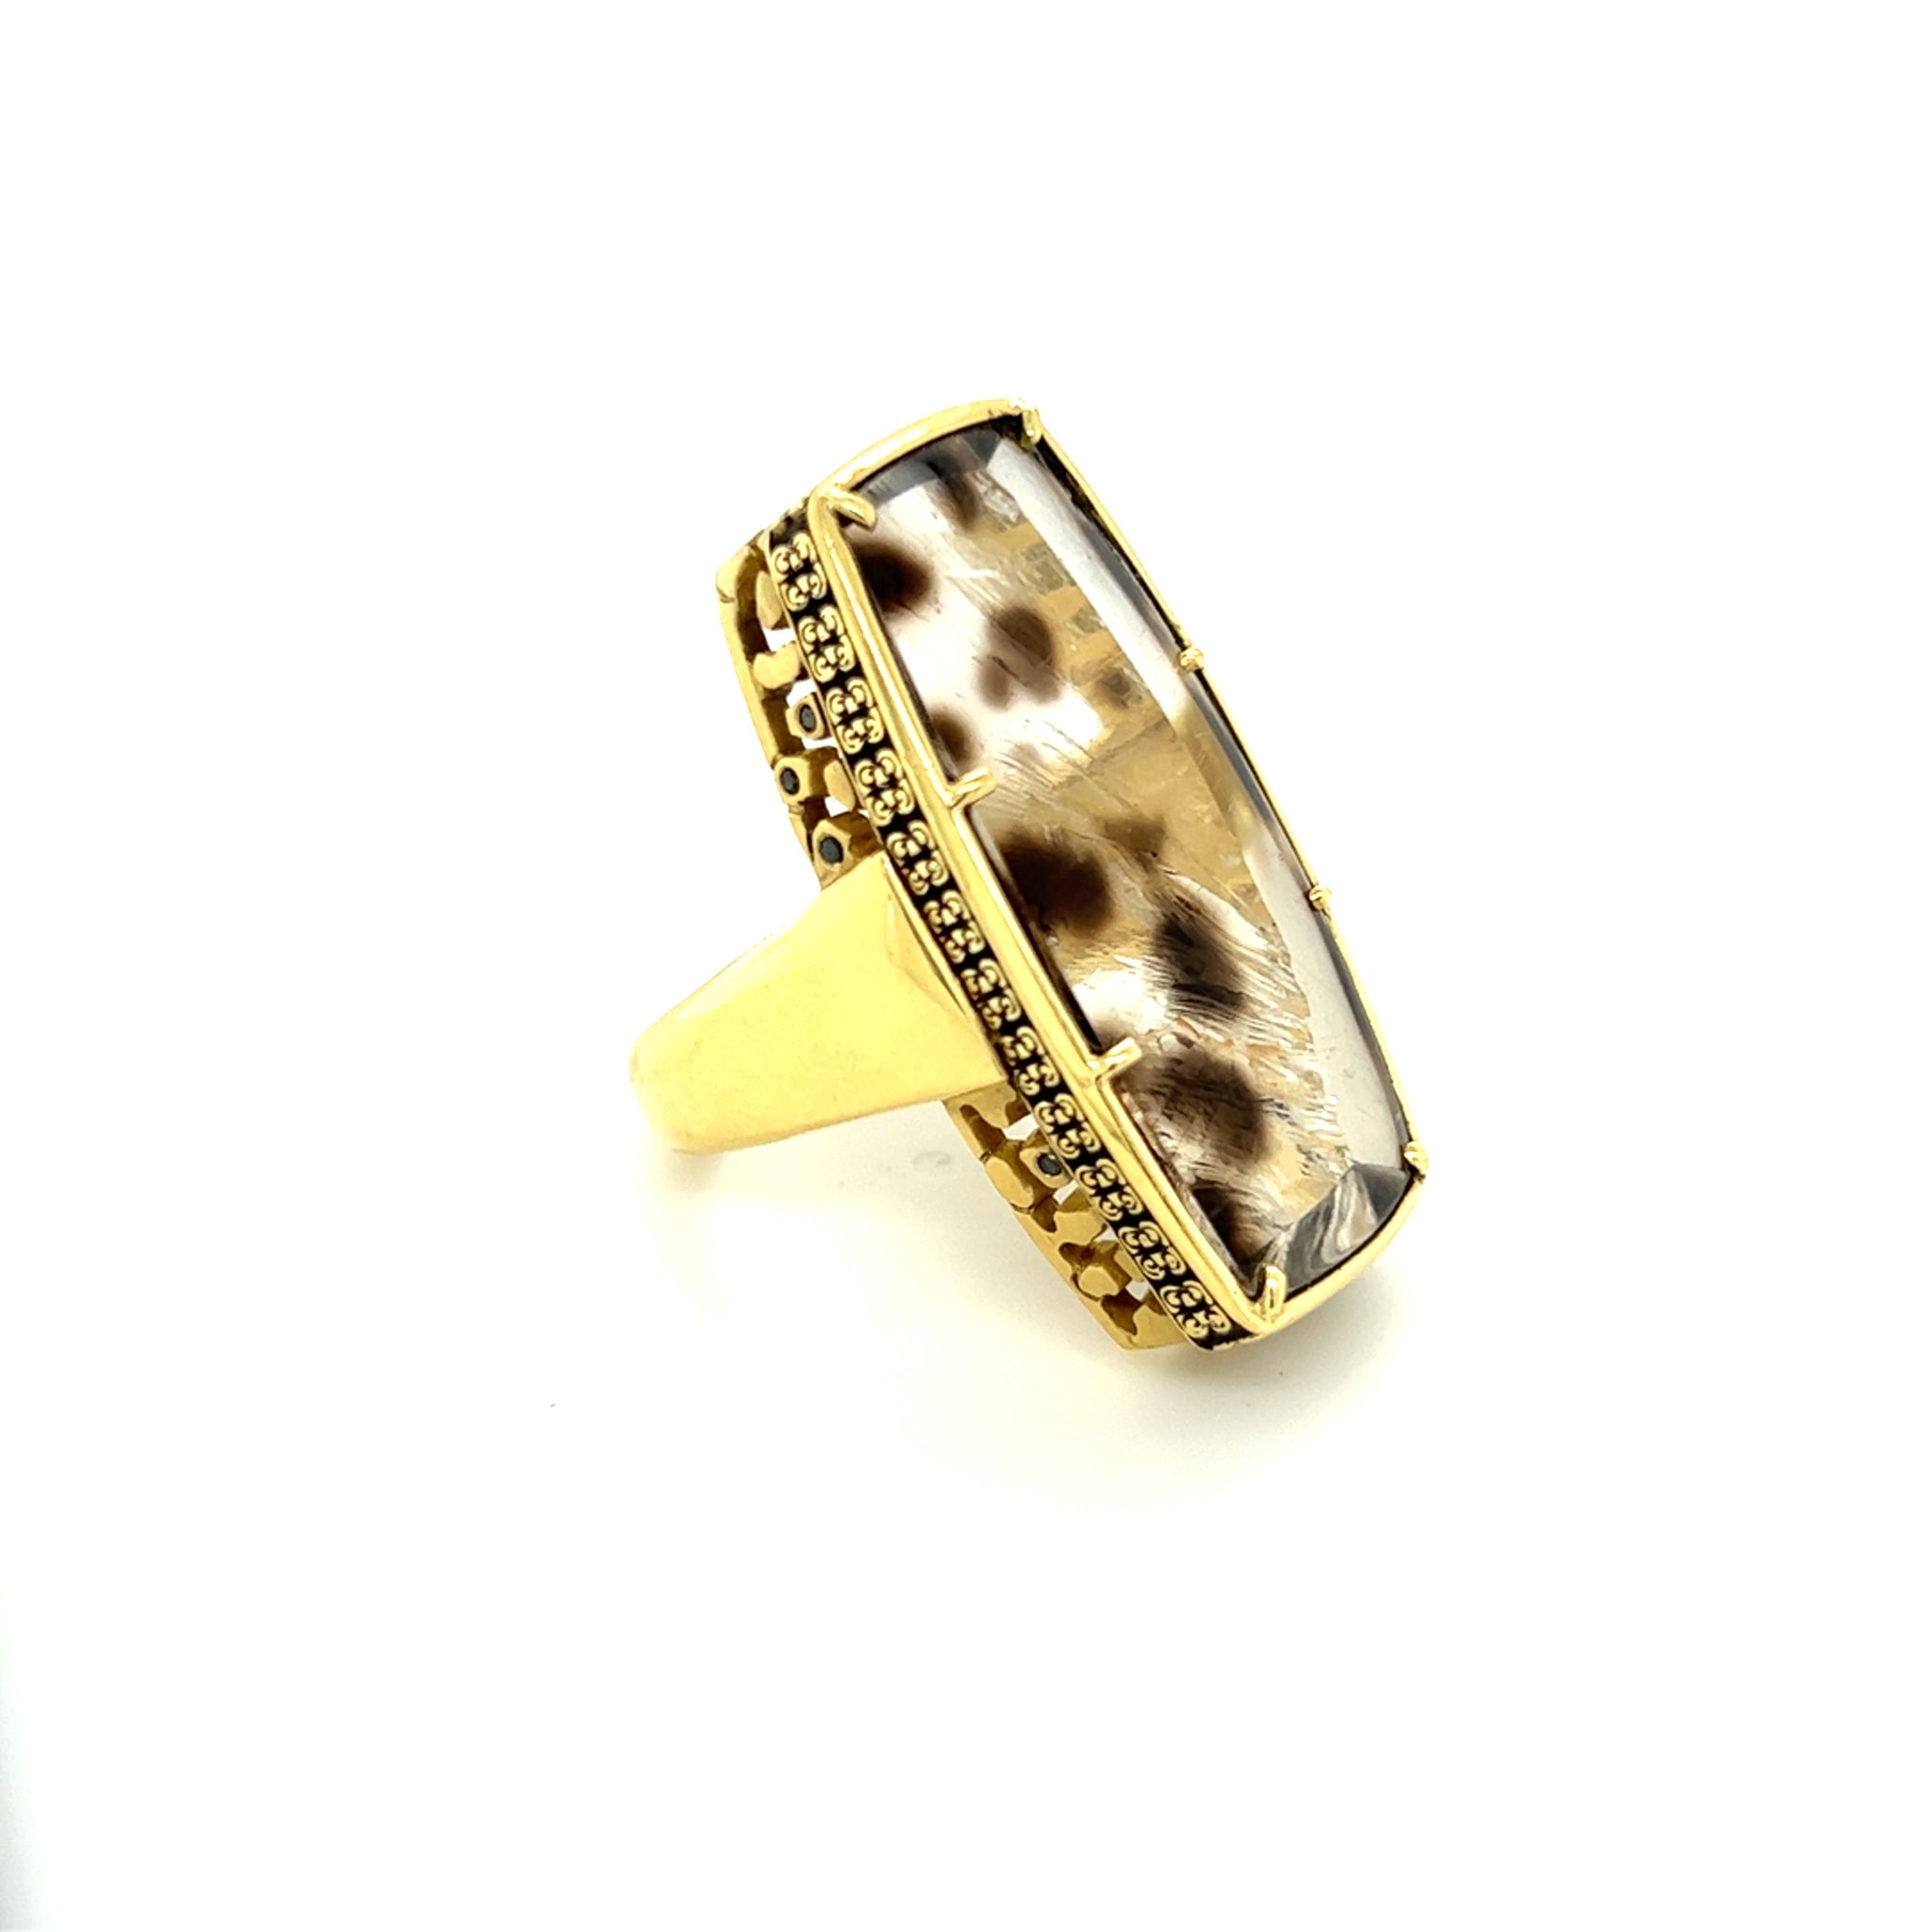 One-of-a-kind Leopard Agate Cocktail Ring